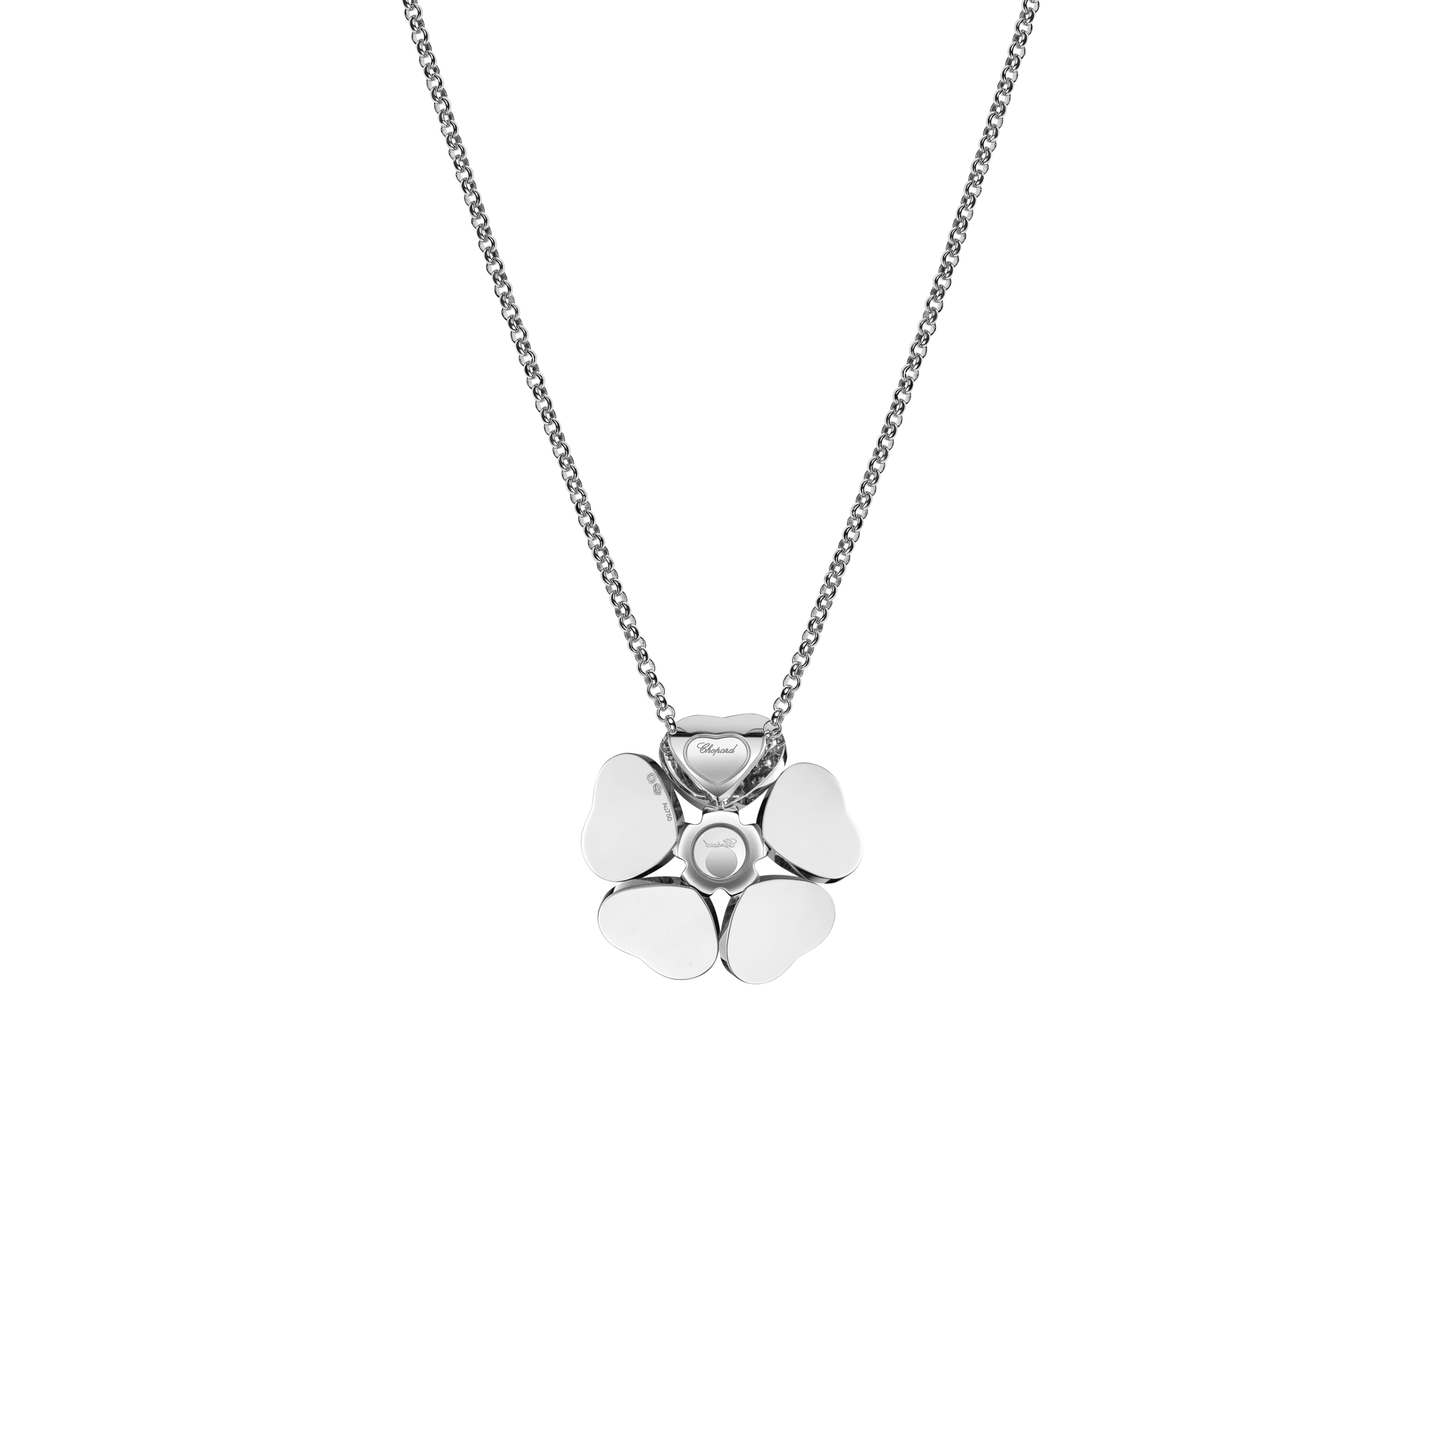 HAPPY HEARTS FLOWERS PENDANT, ETHICAL WHITE GOLD, DIAMONDS 79A085-1901